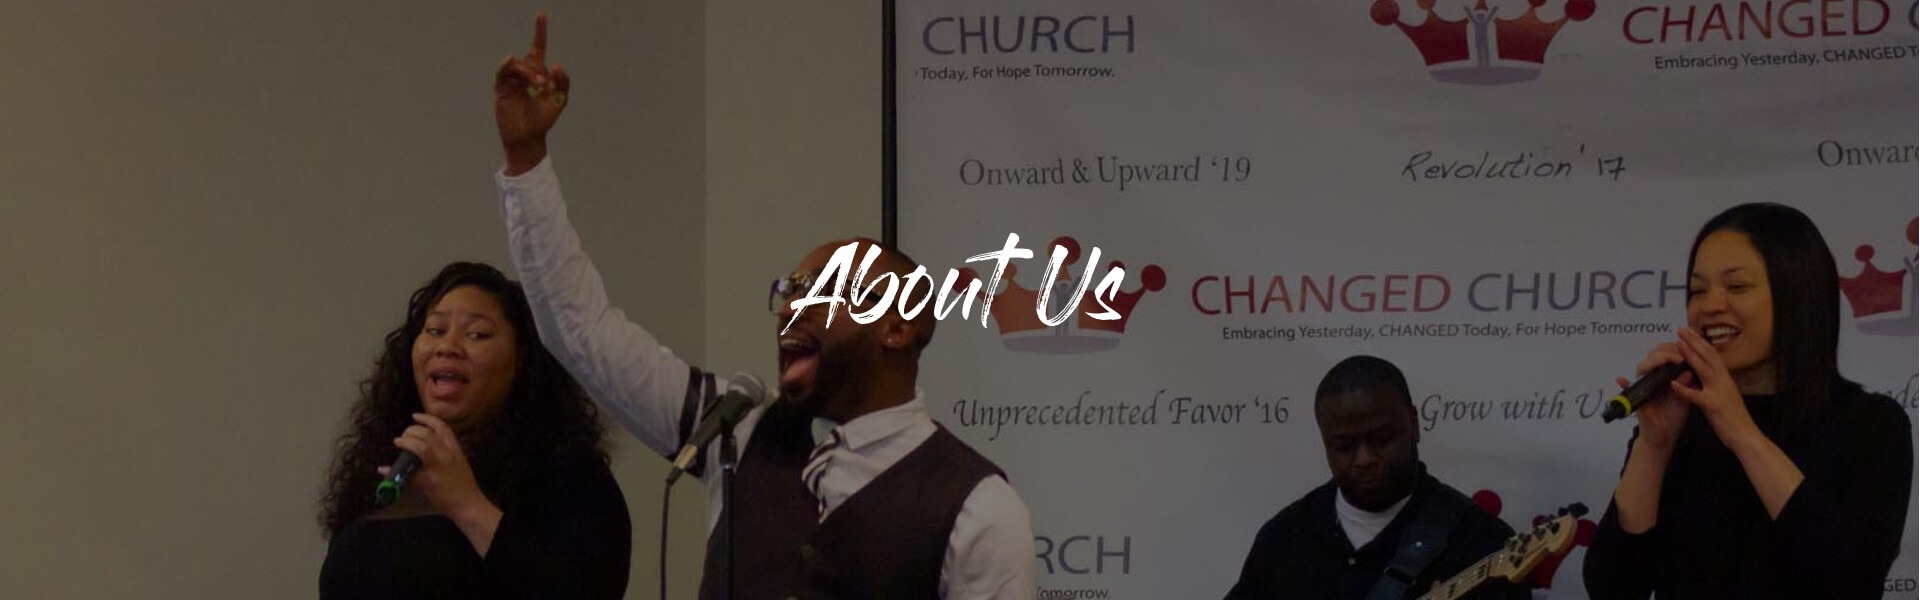 Changed Church About Us title